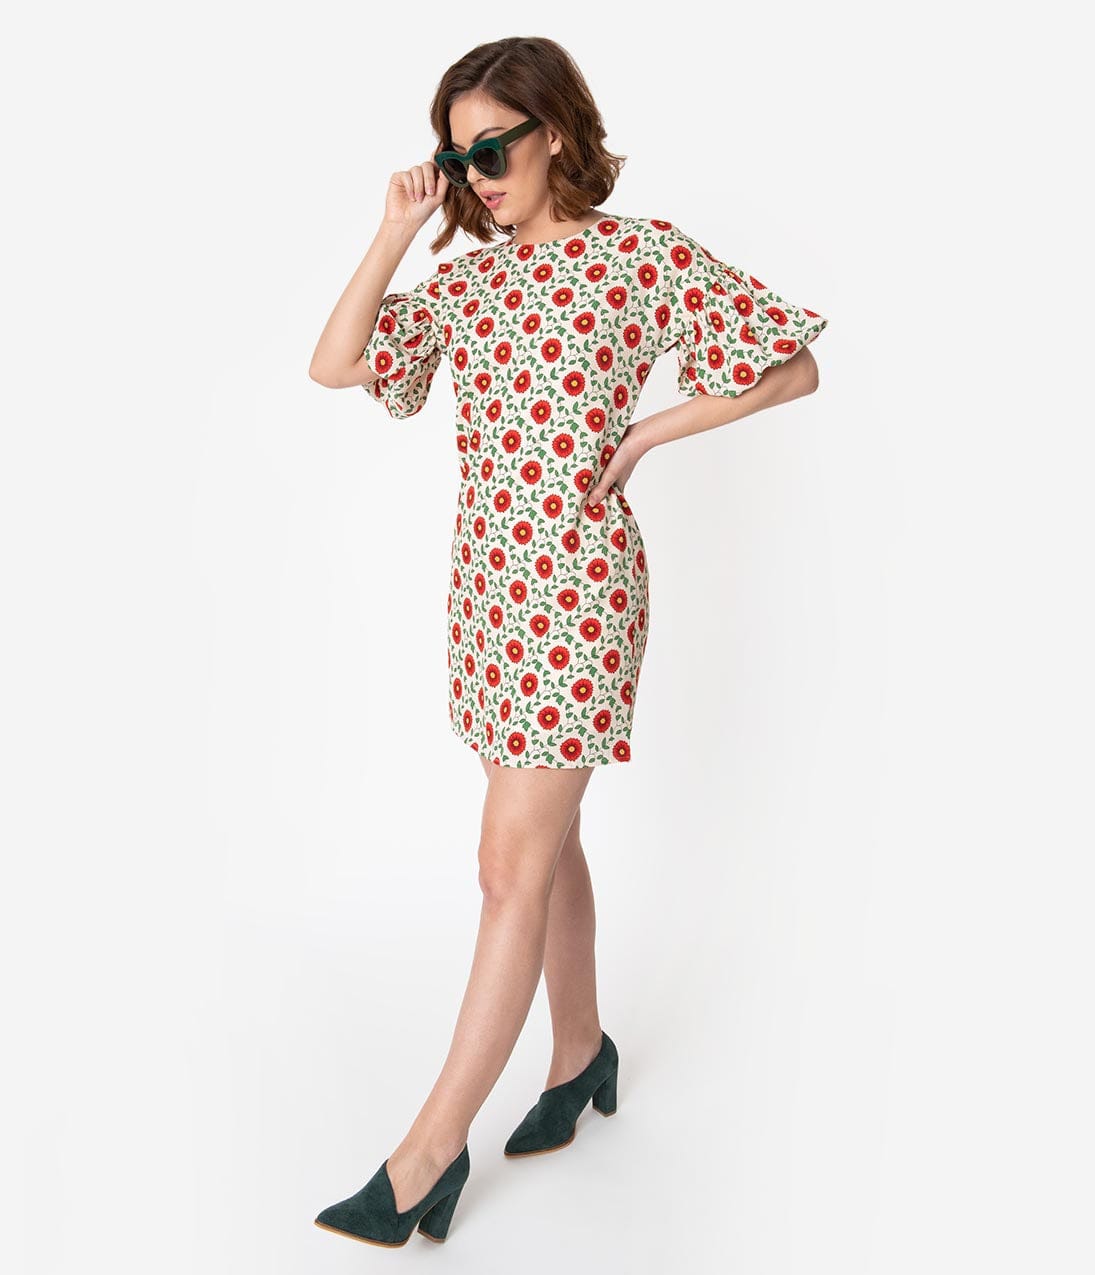 Cream & Red Poppy Floral Print Puff Sleeve Shift Dress